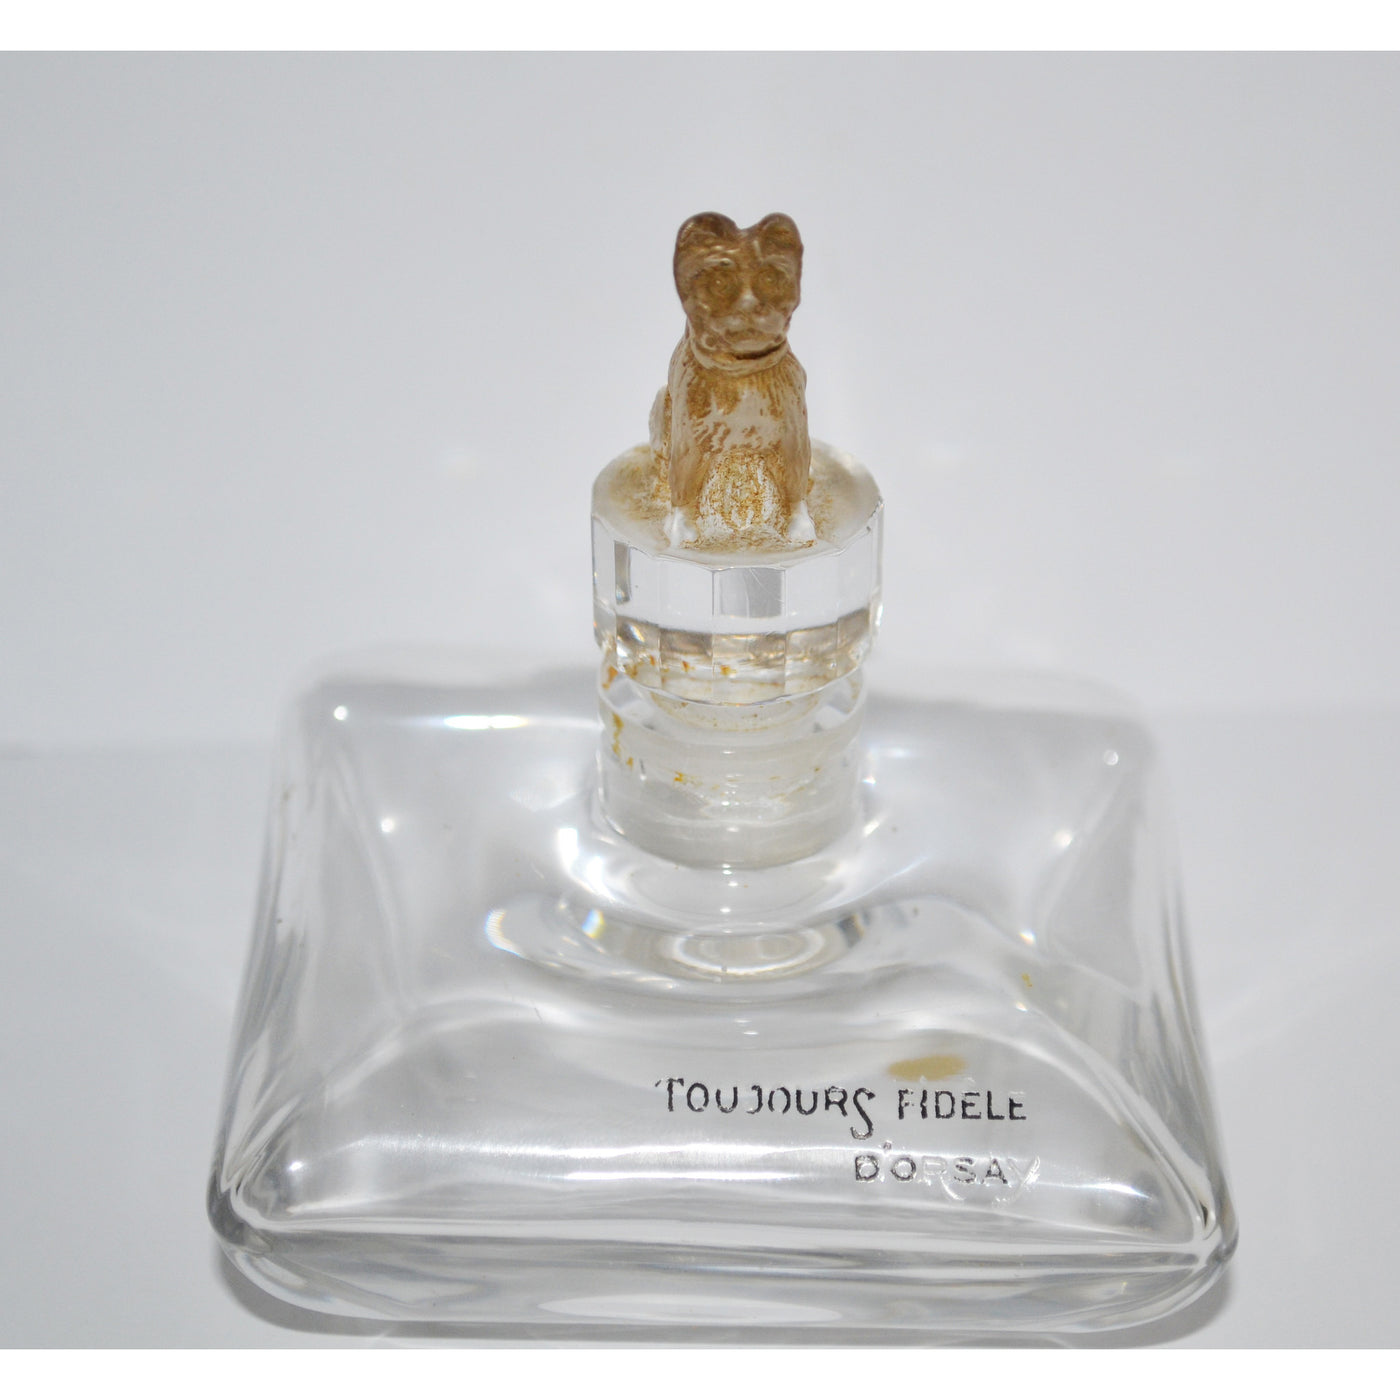 Vintage Toujours Fidele Baccarat Perfume By D'Orsay